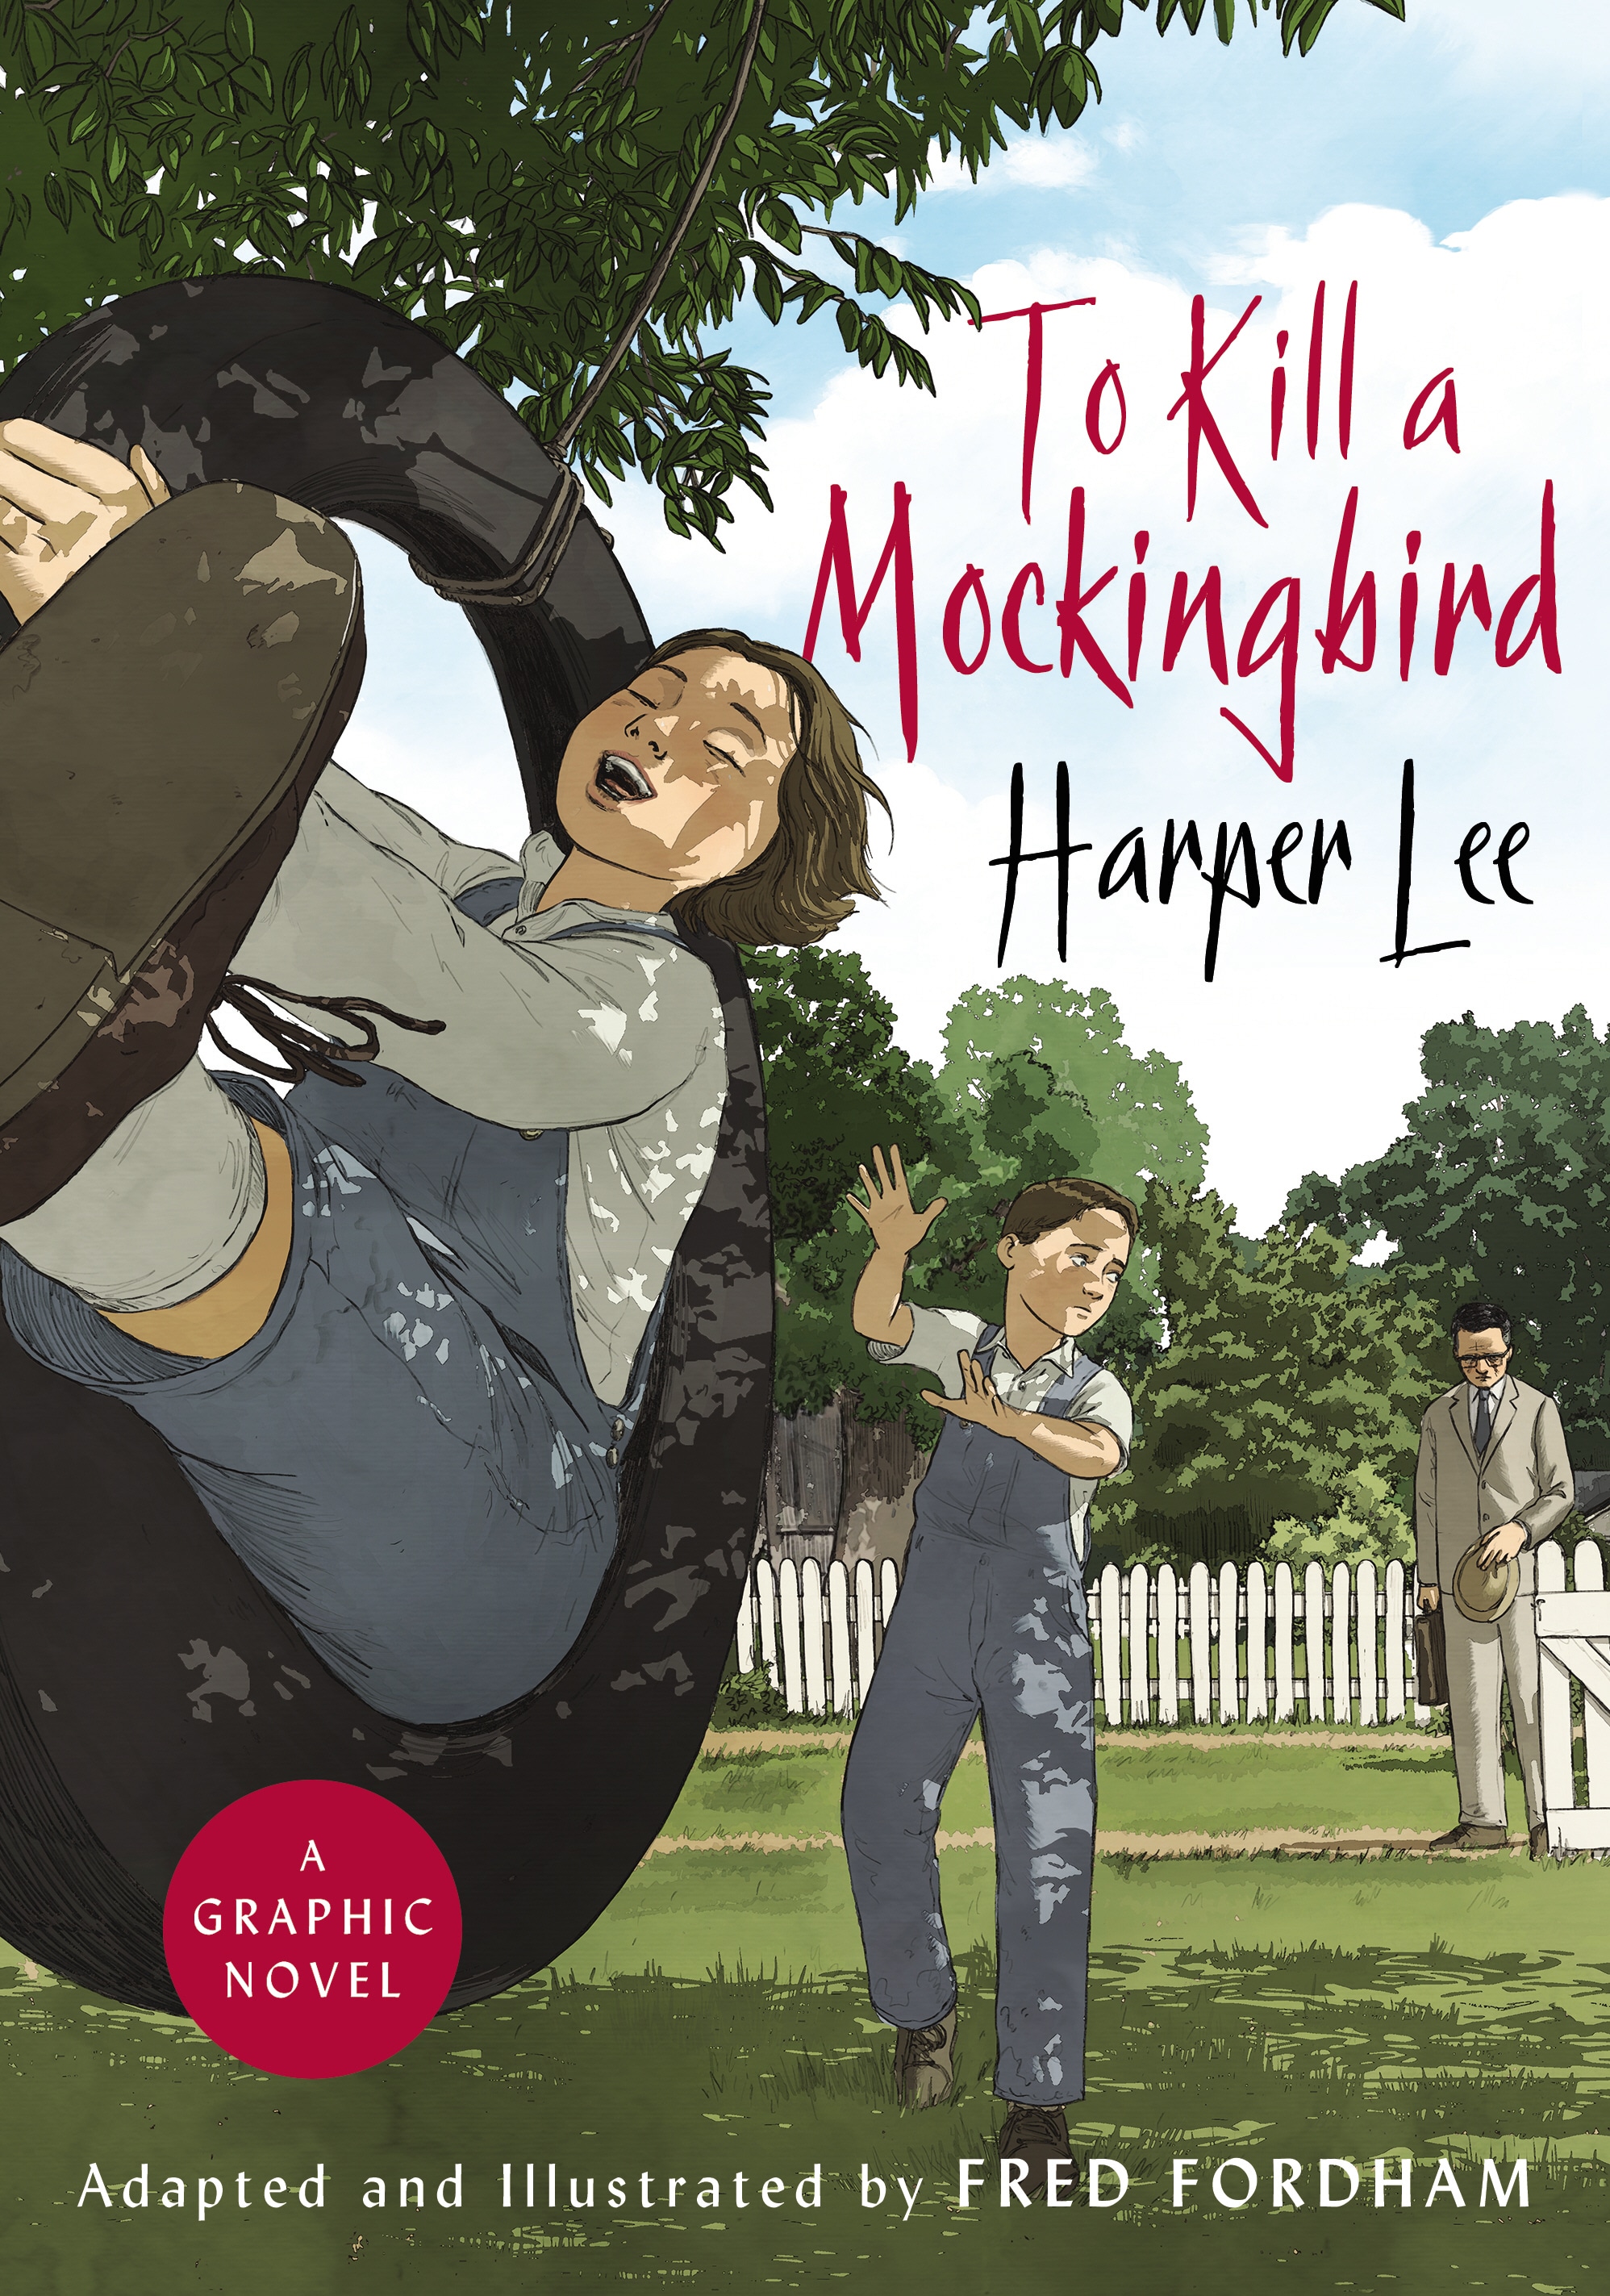 Book “To Kill a Mockingbird” by Harper Lee, Fred Fordham — October 30, 2018